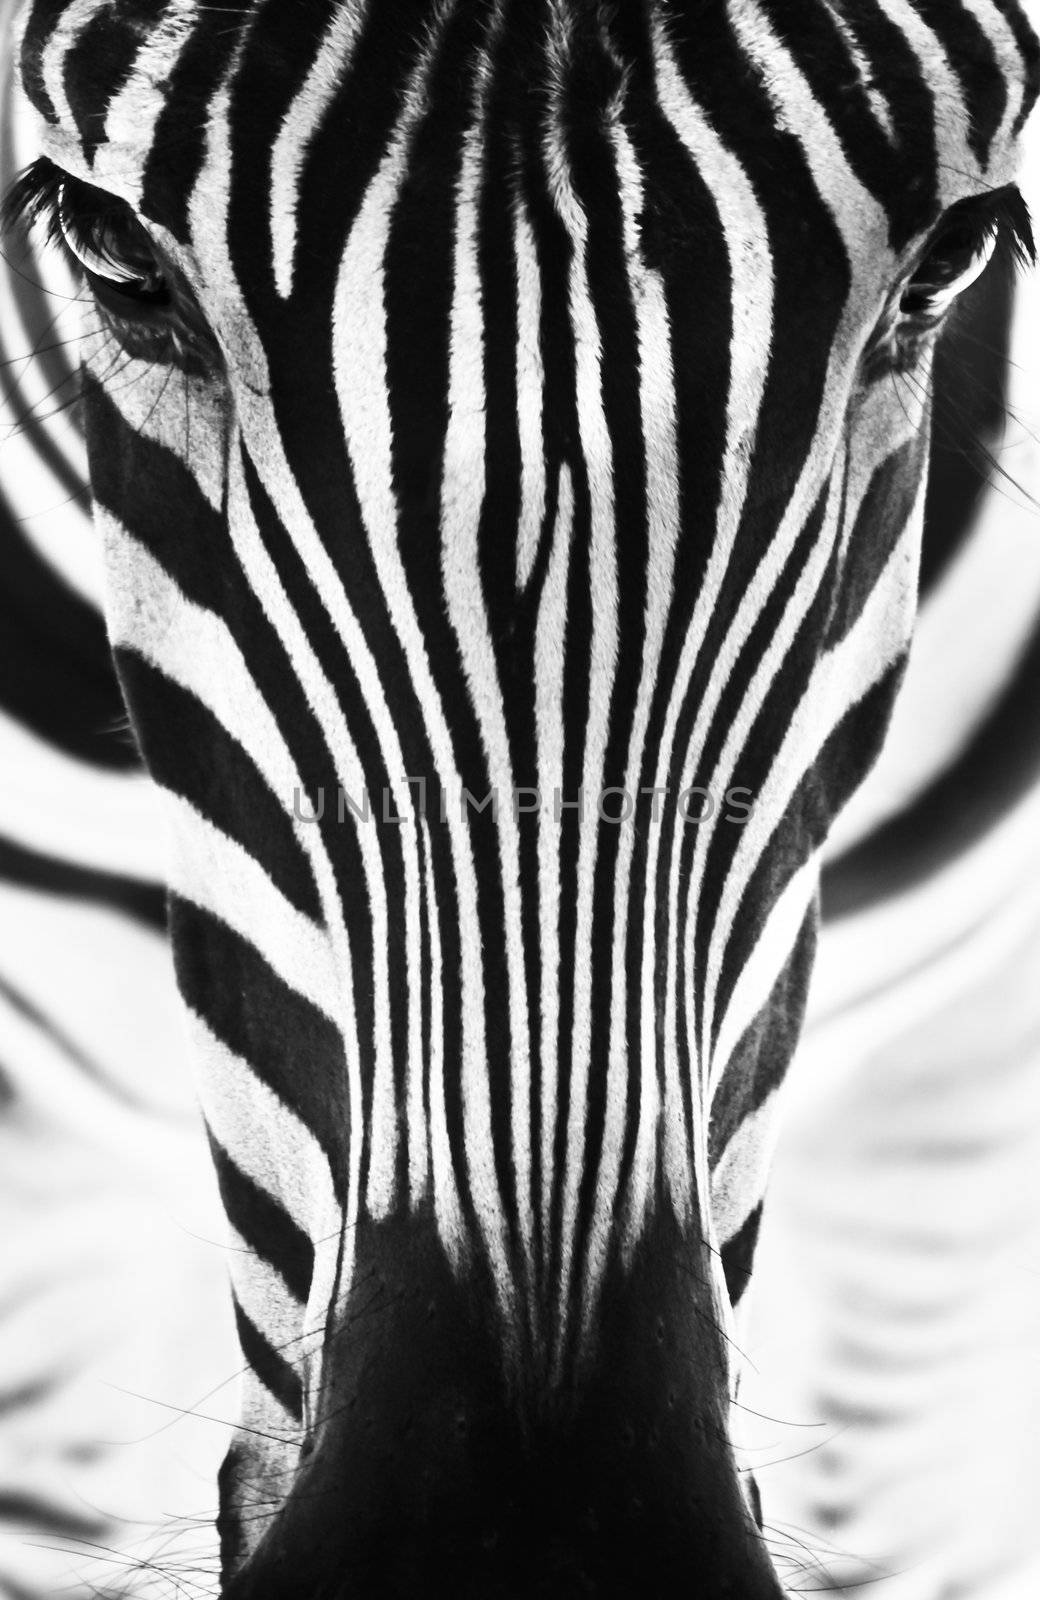 Artistic black and white closeup portrait of a zebra - emphasized graphical pattern.